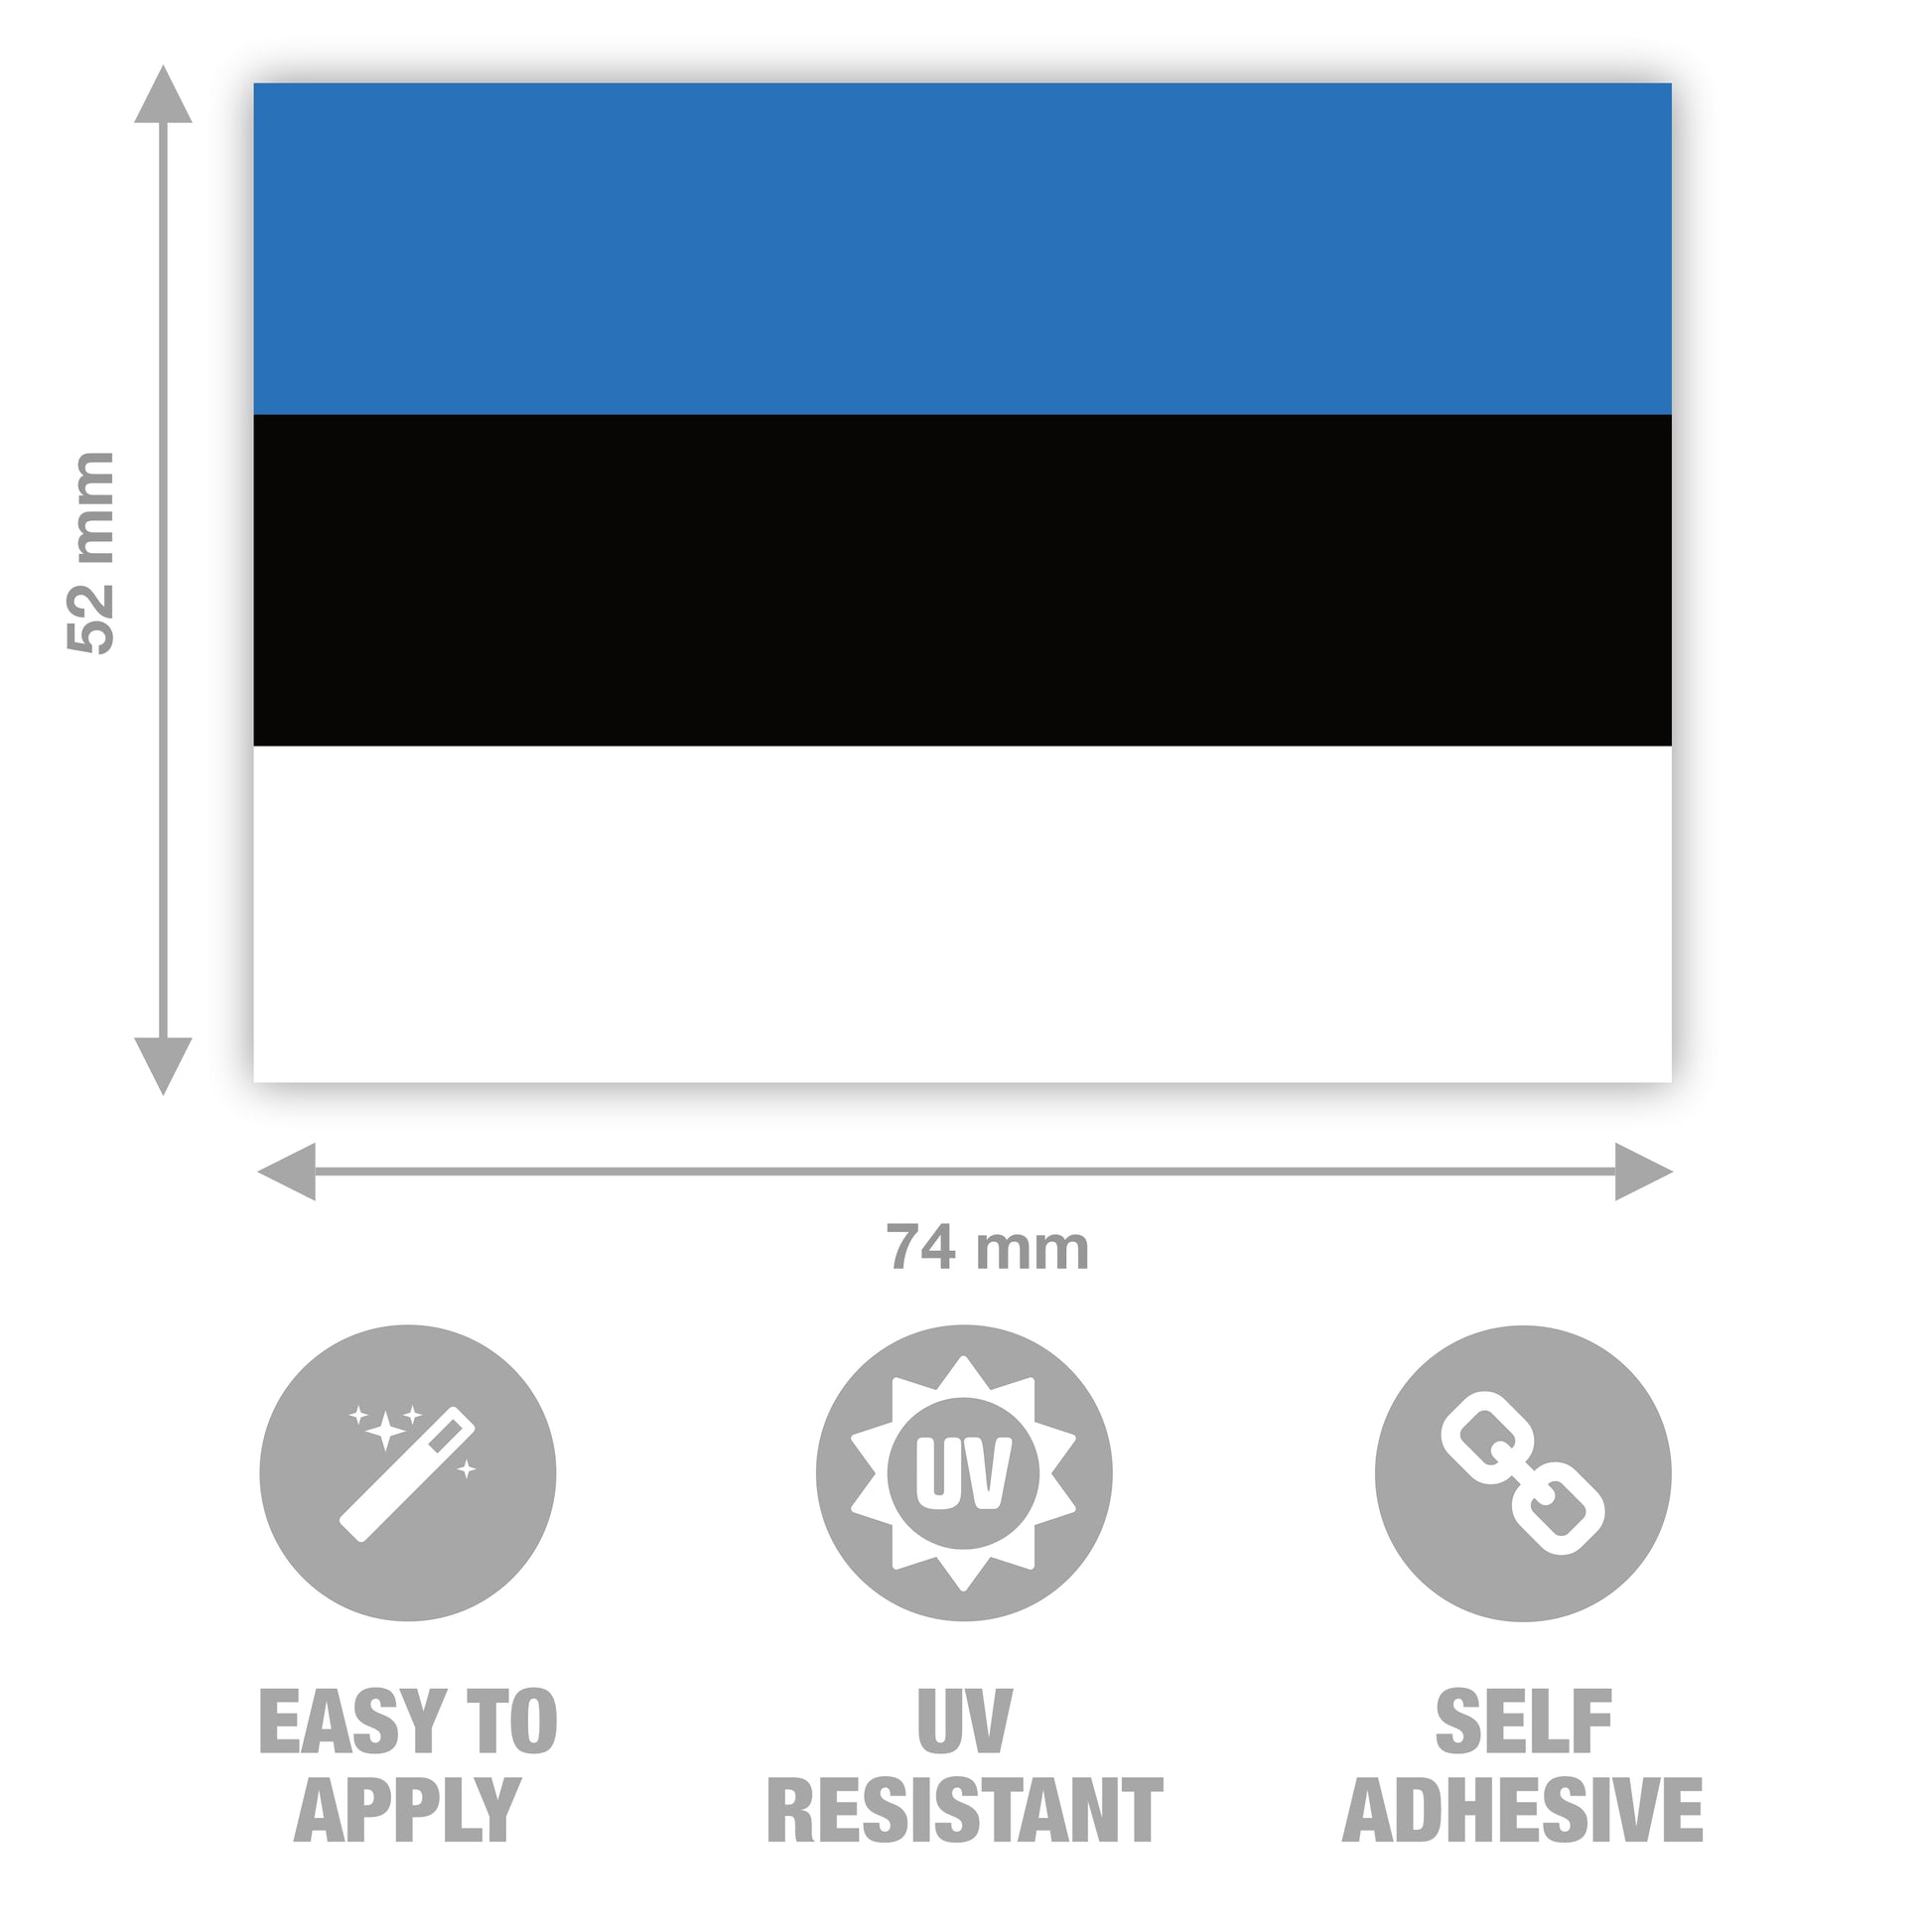 Estonian Flag Stickers by Gobrecht & Ulrich with dimensions